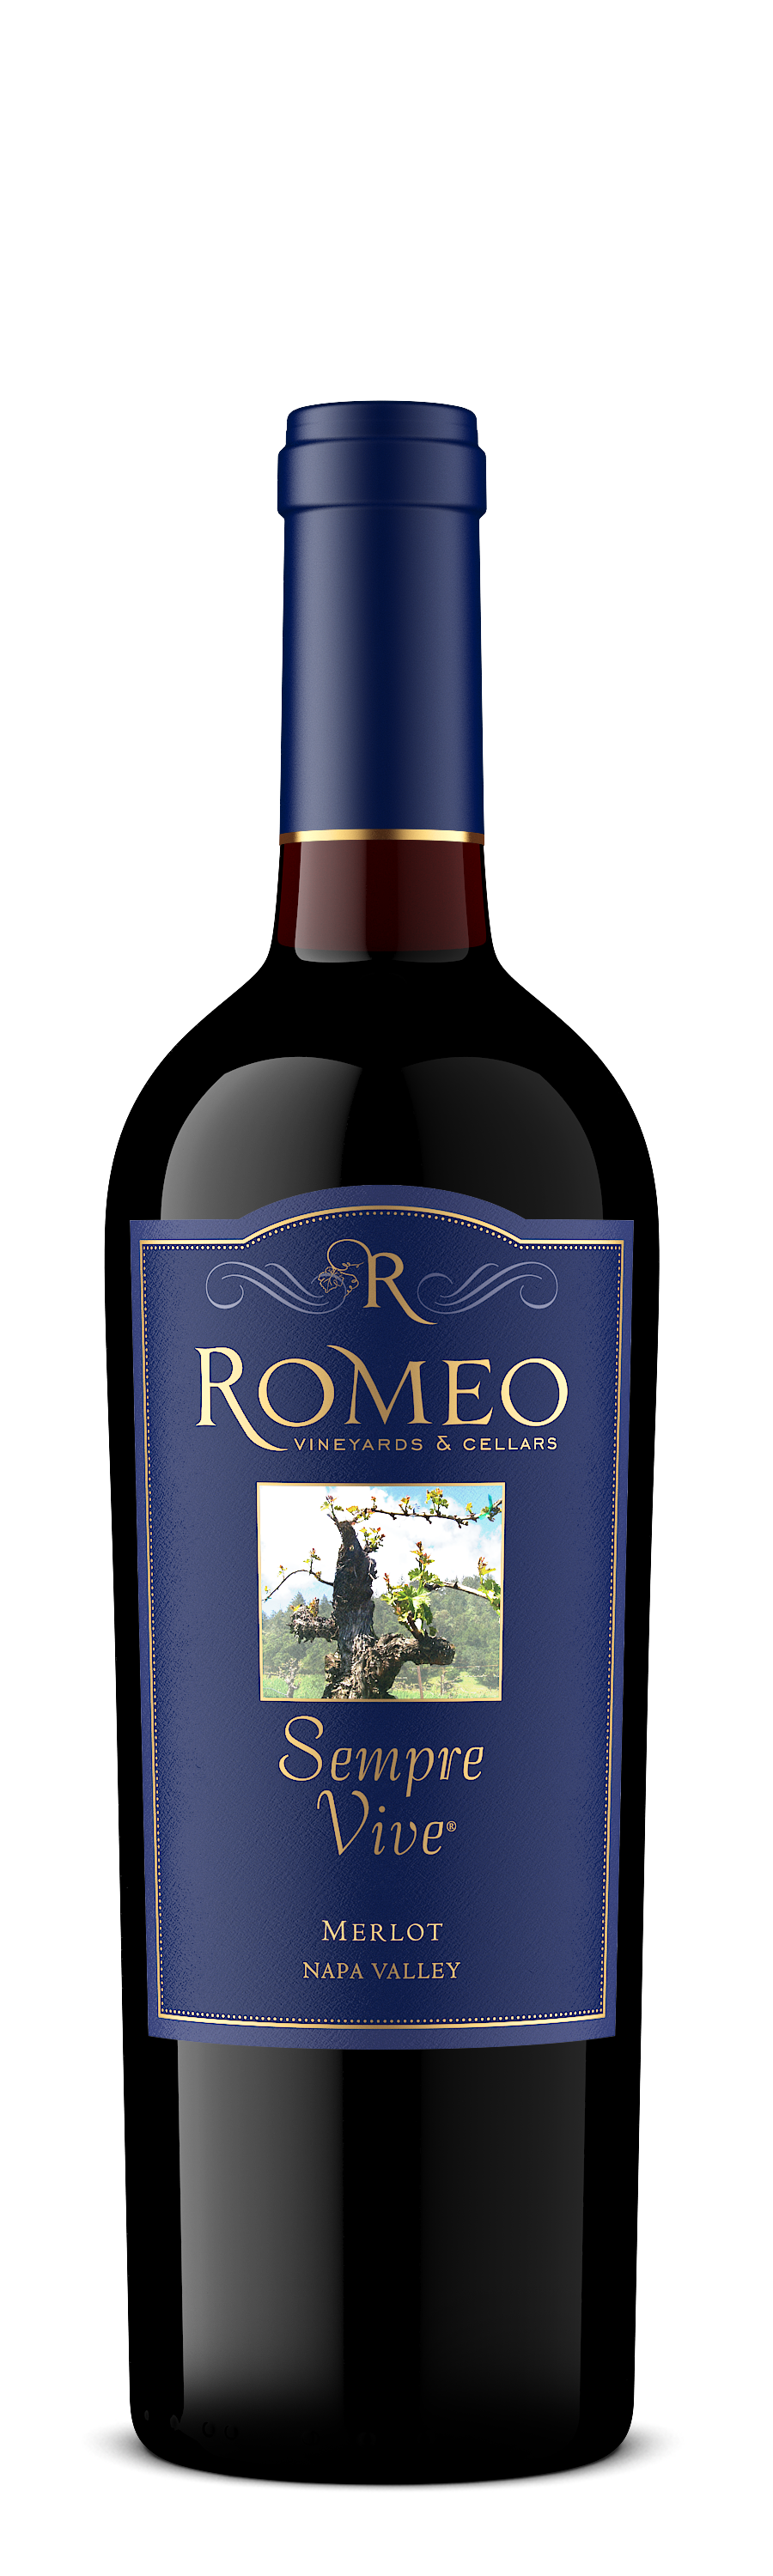 Product Image for 2014 Merlot